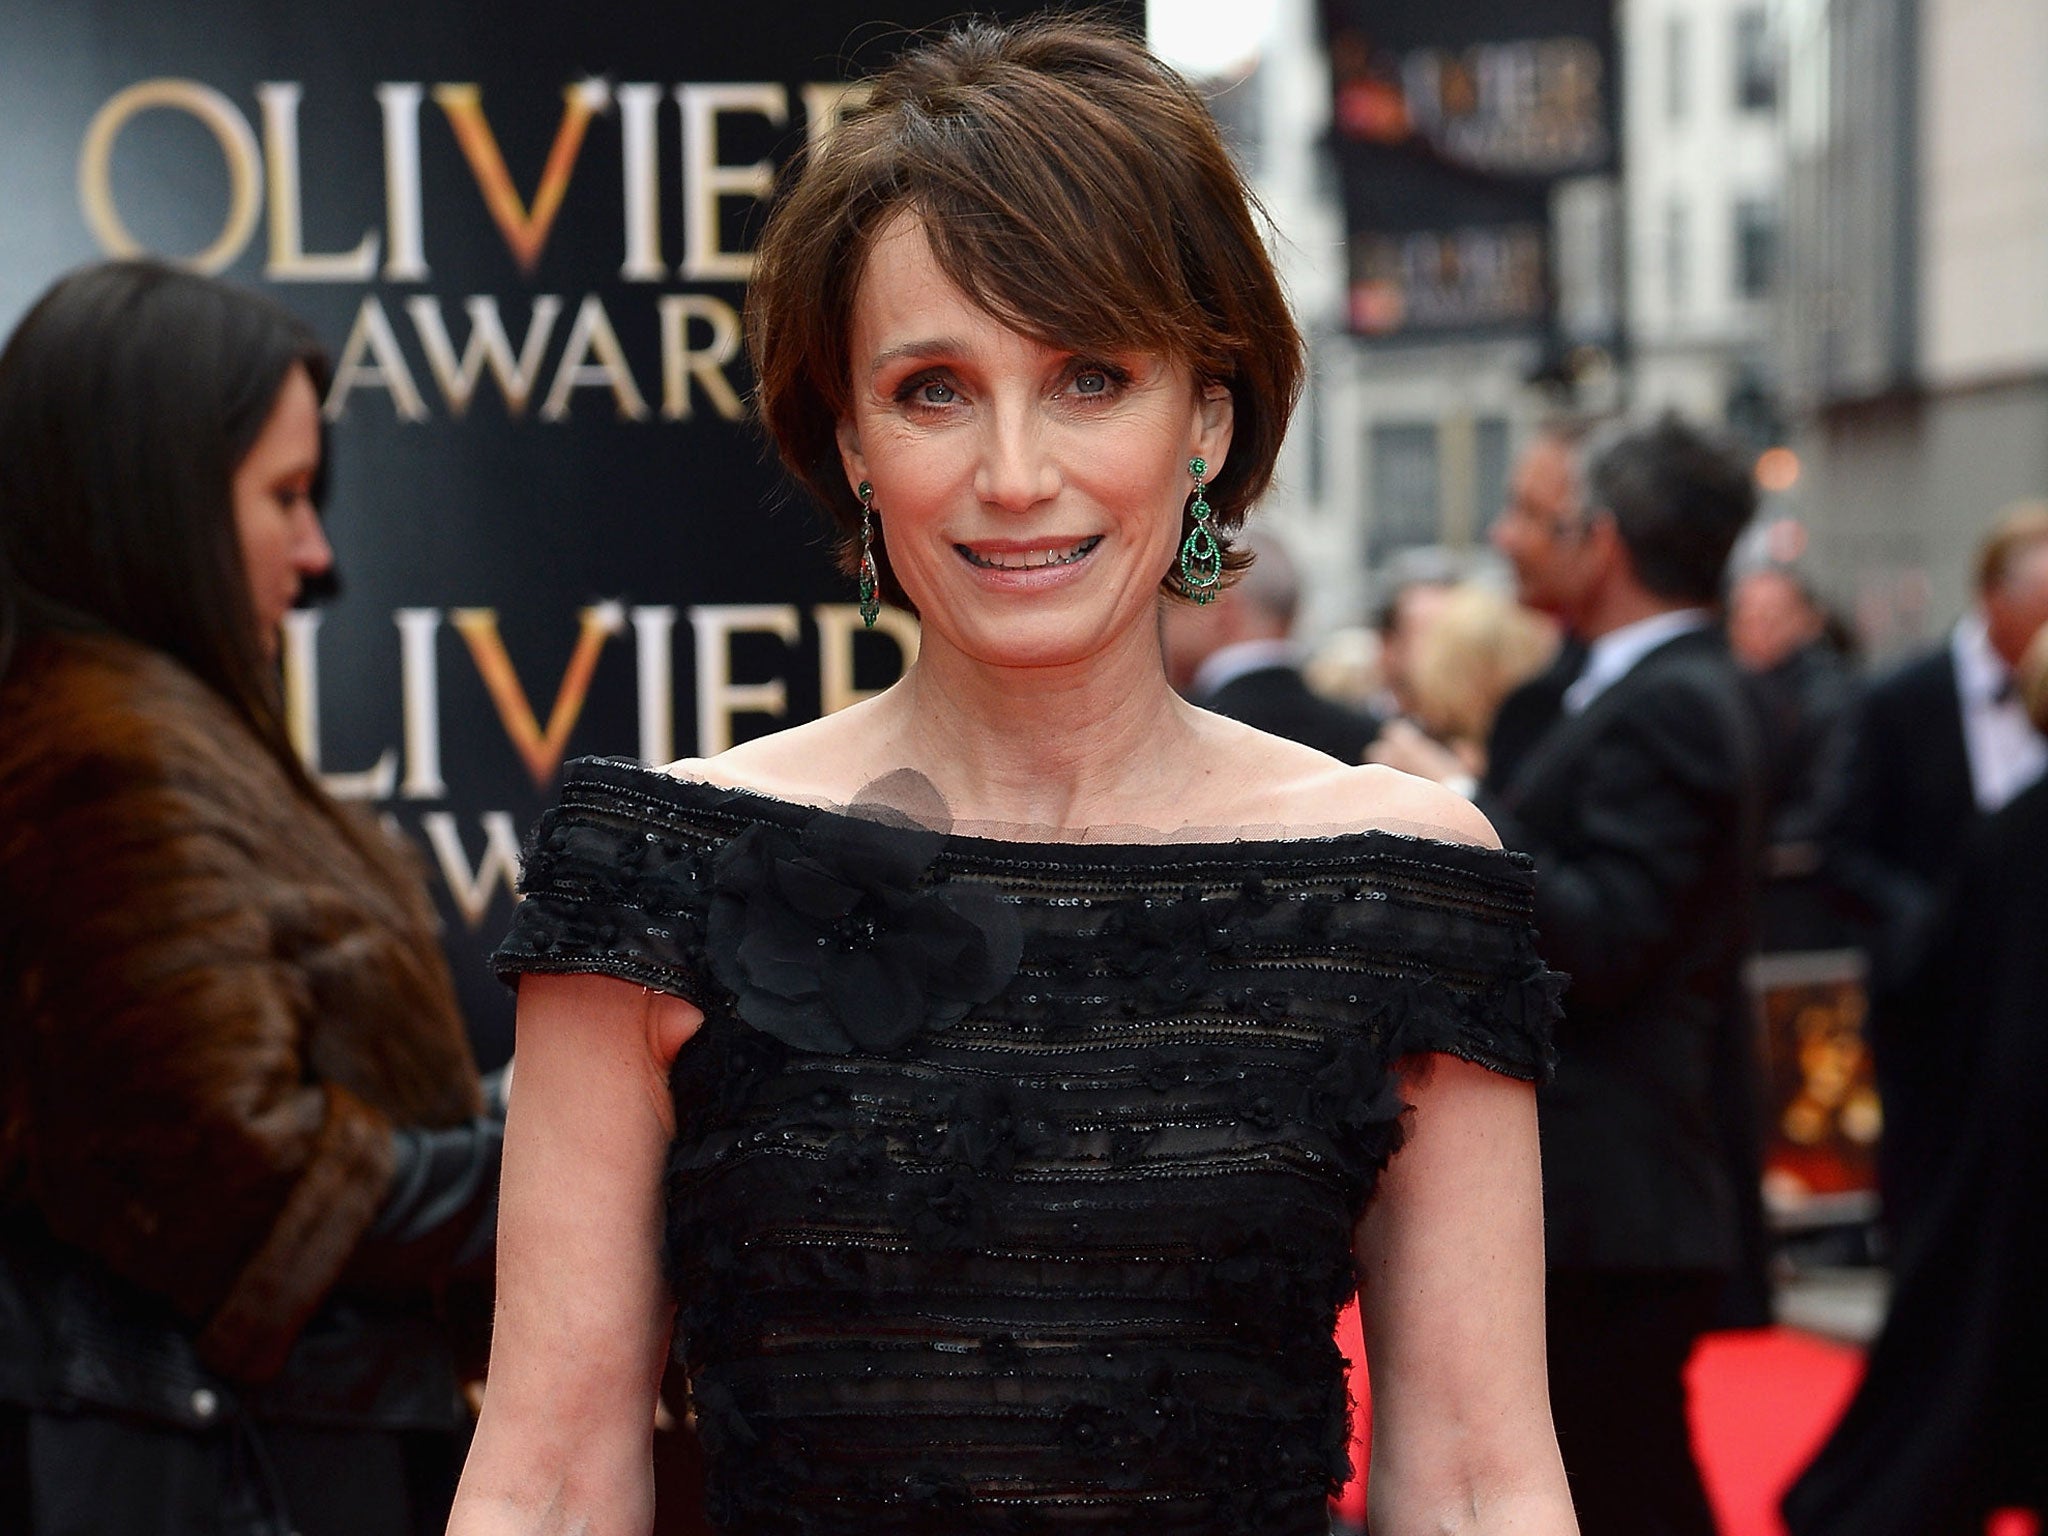 Kristin Scott Thomas outside the Royal Opera House before the ceremony (Getty)